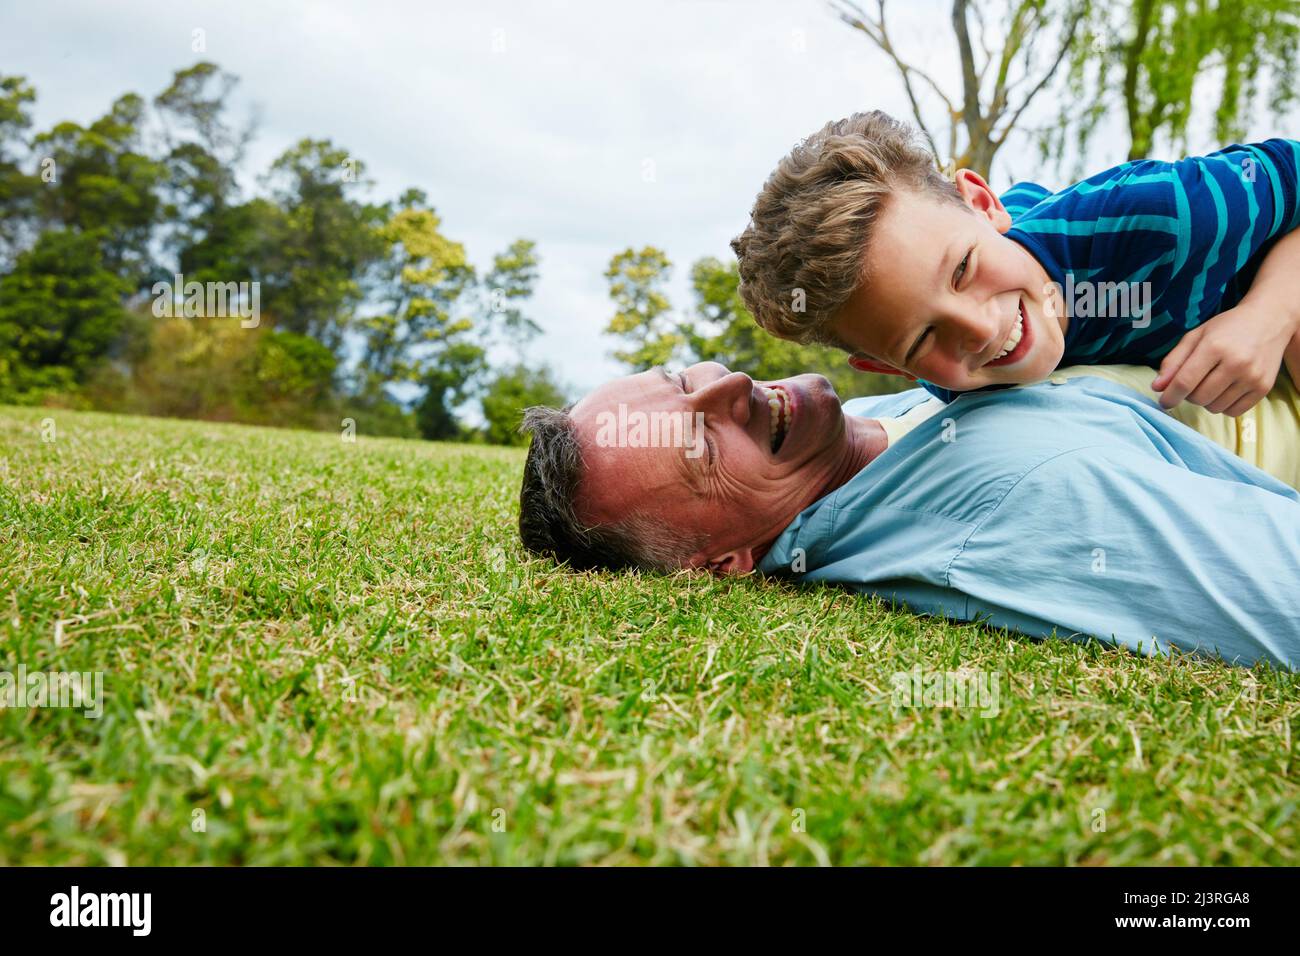 Sharing moments between father and son. Shot of a laughing father and son lying on grass. Stock Photo